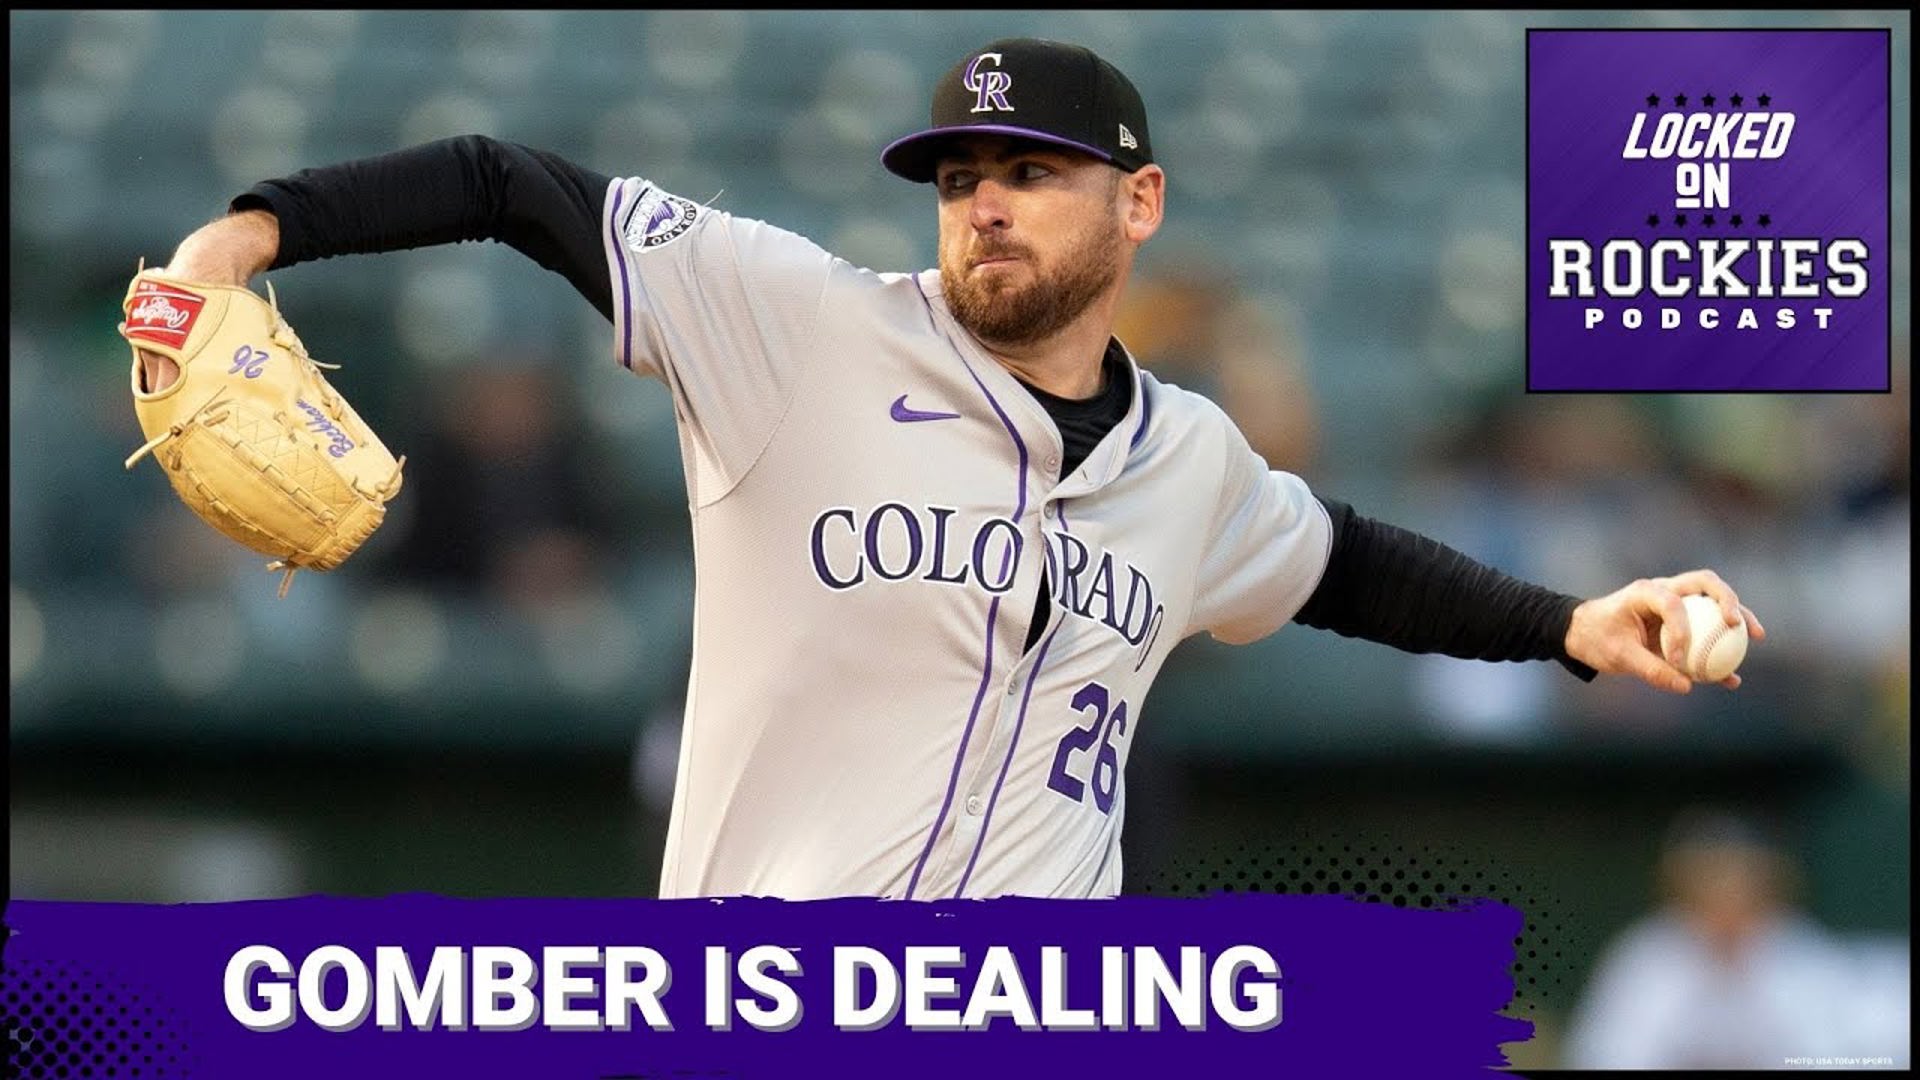 The Rockies had plenty of chances to score in game 2 against Oakland, but instead, they just used the long ball and survive in extra innings.